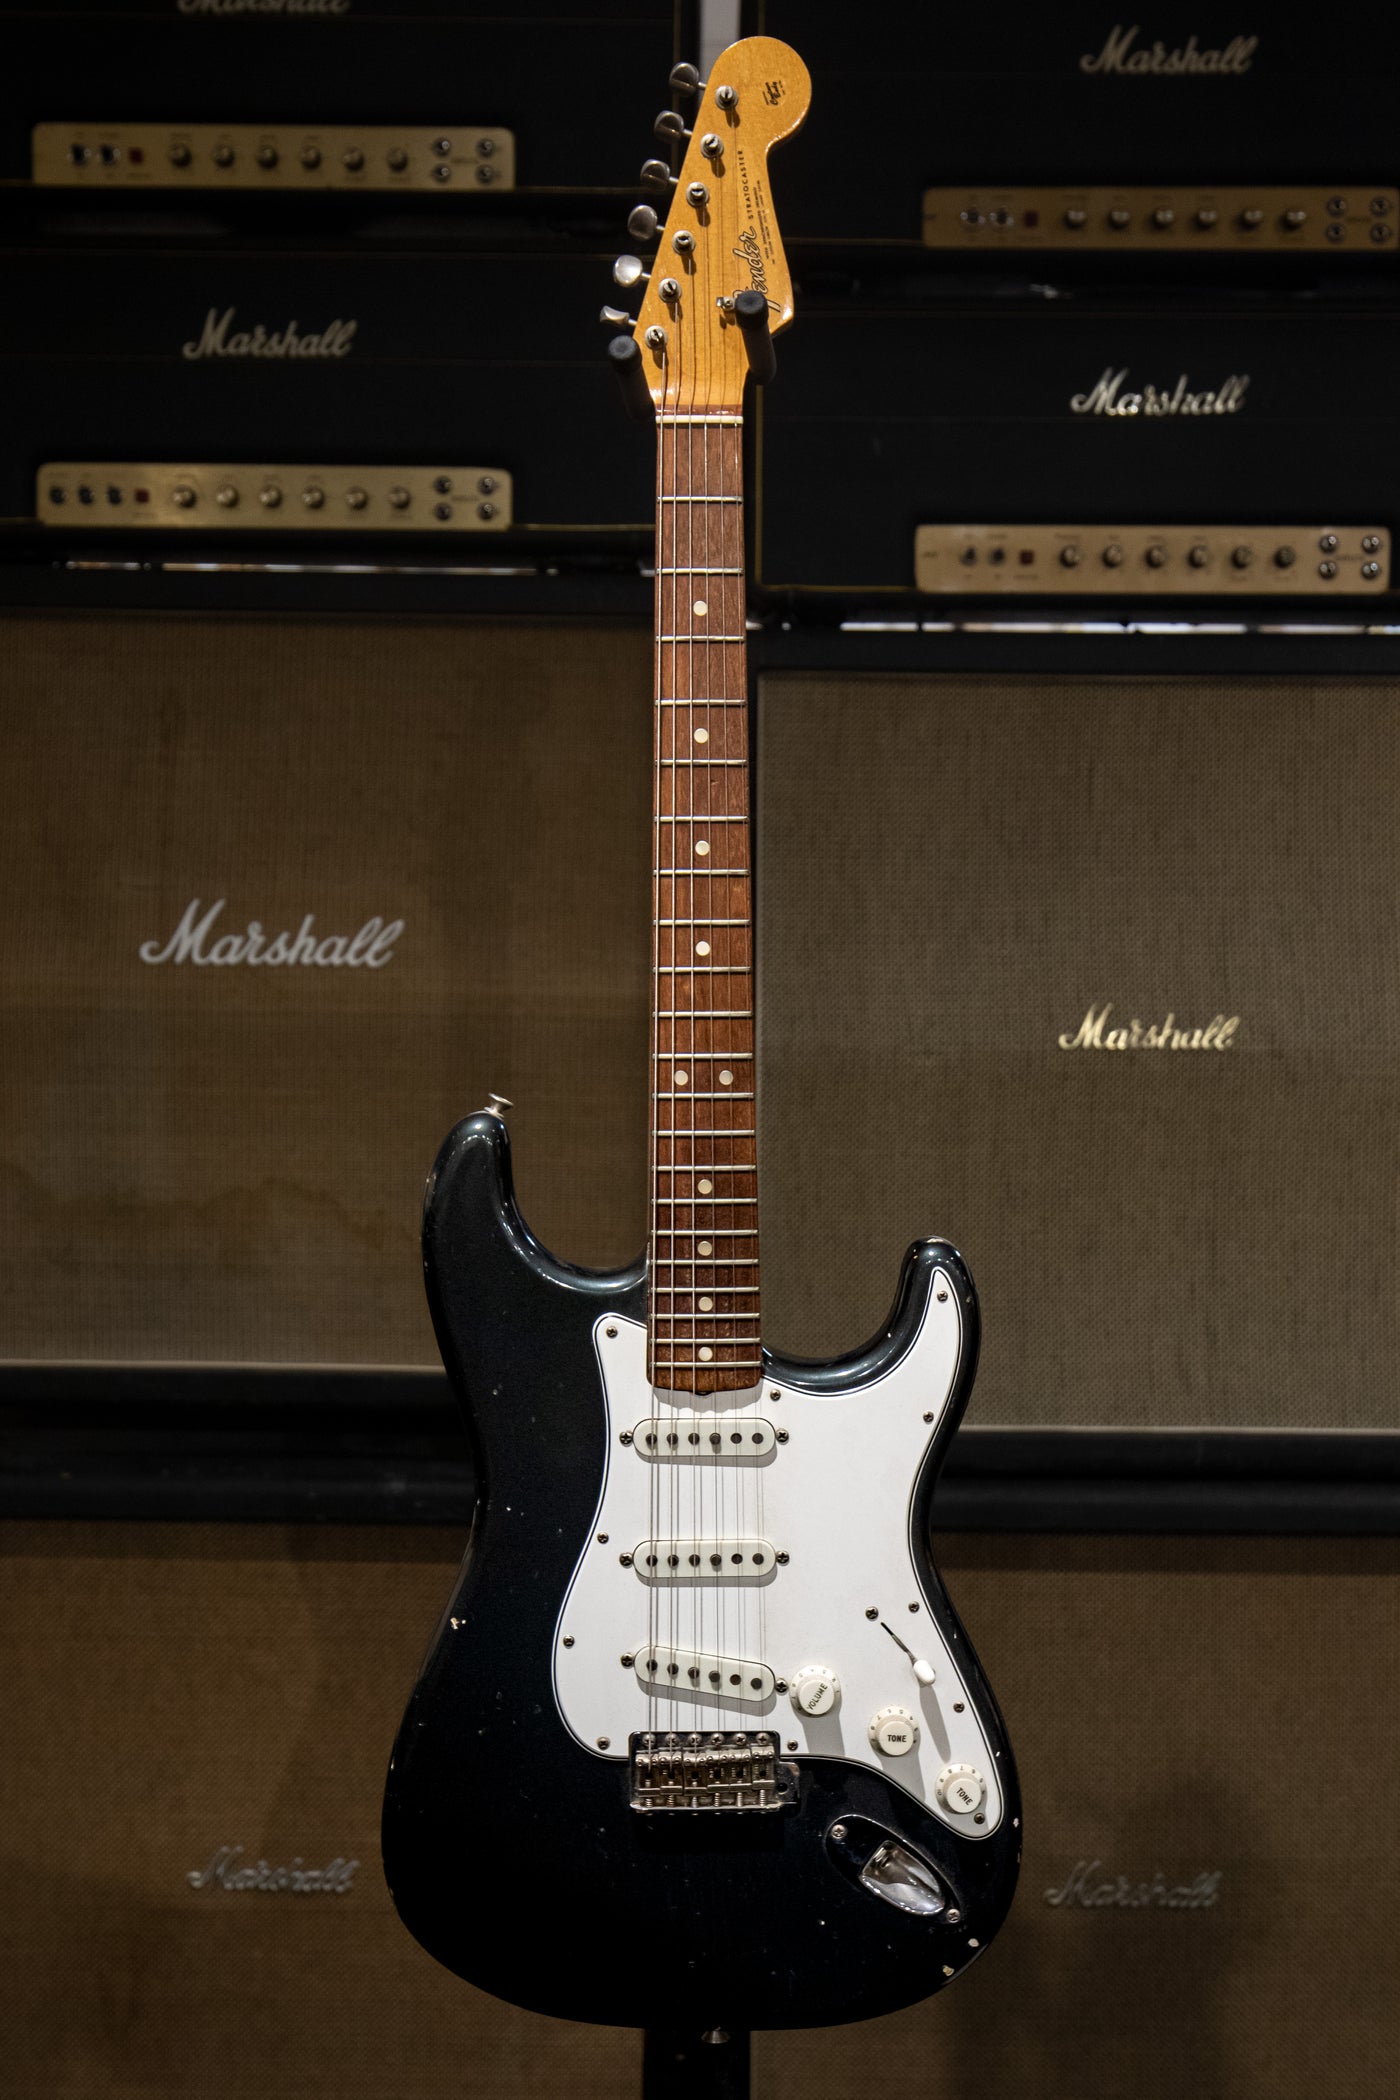 1965 Fender Stratocaster - Charcoal Frost Metallic